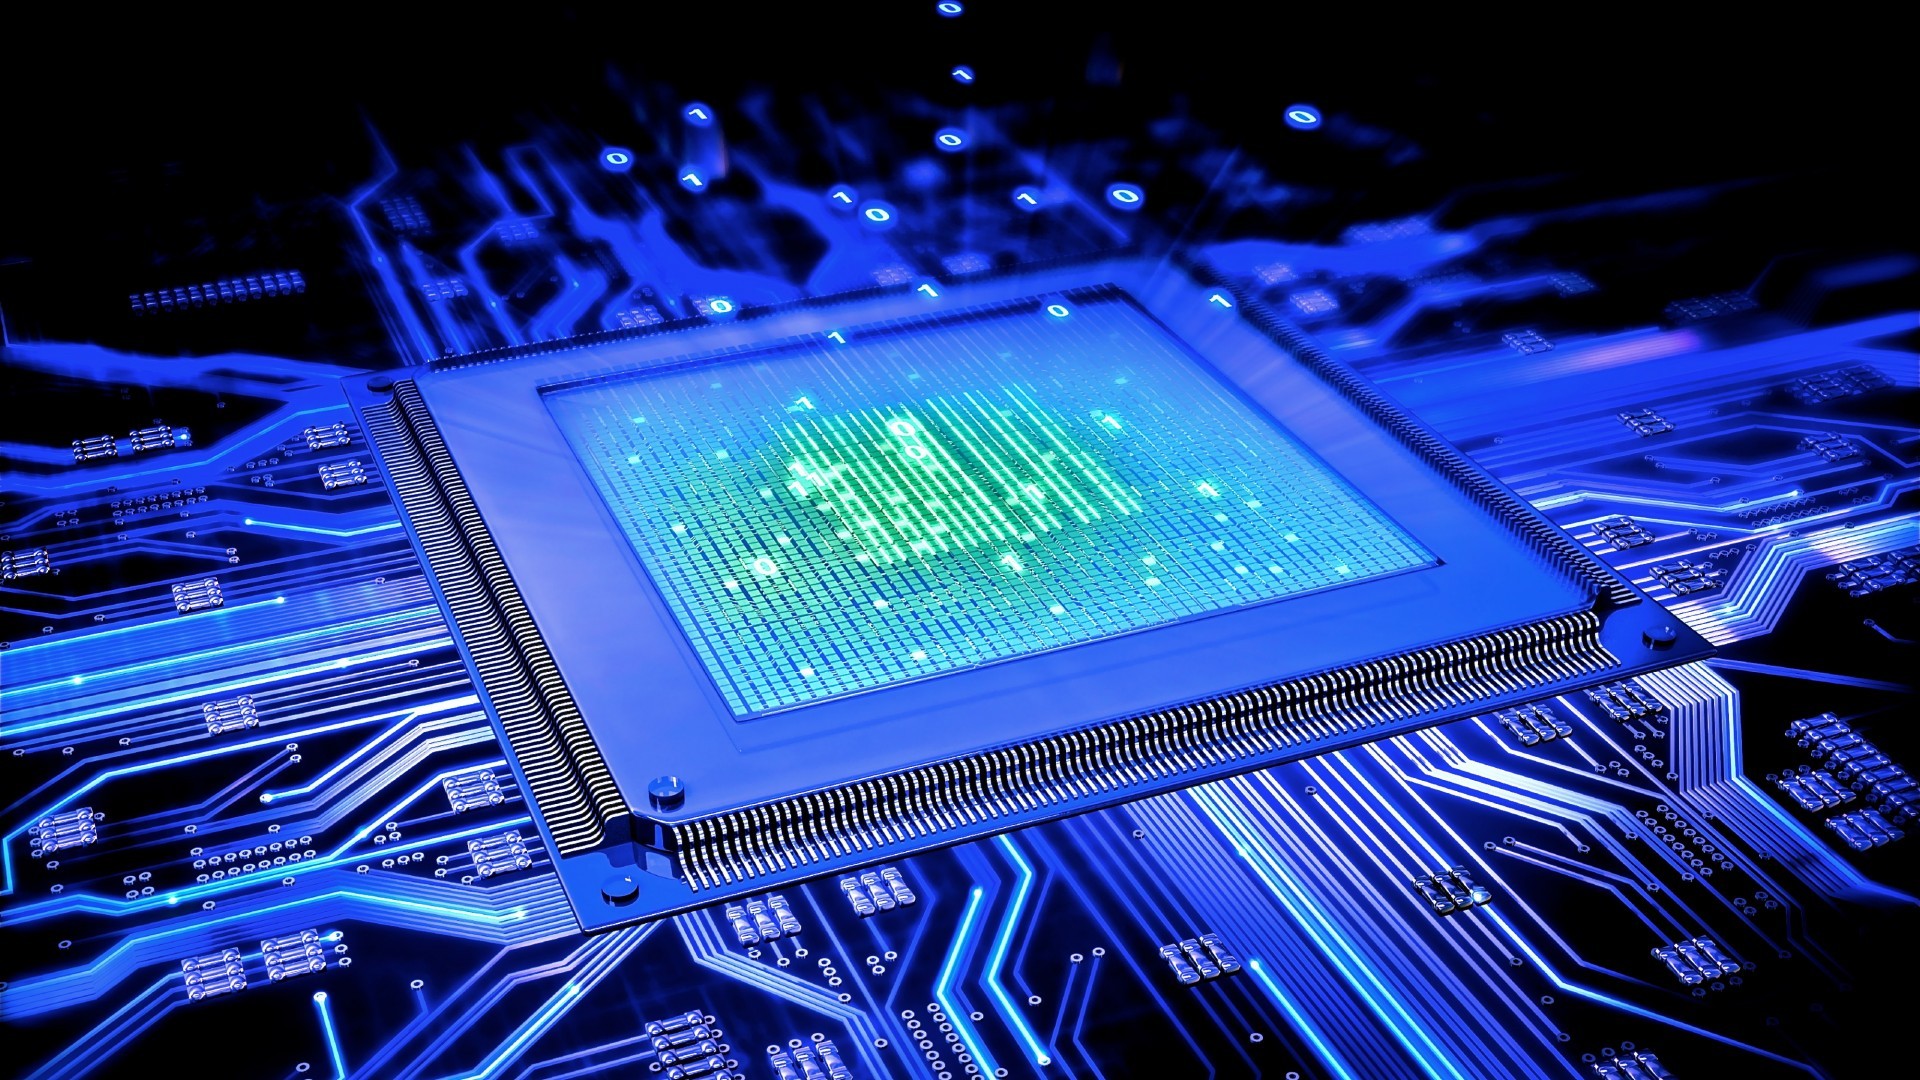  Motherboard Blue Circuits Circuit Board computer wallpaper background